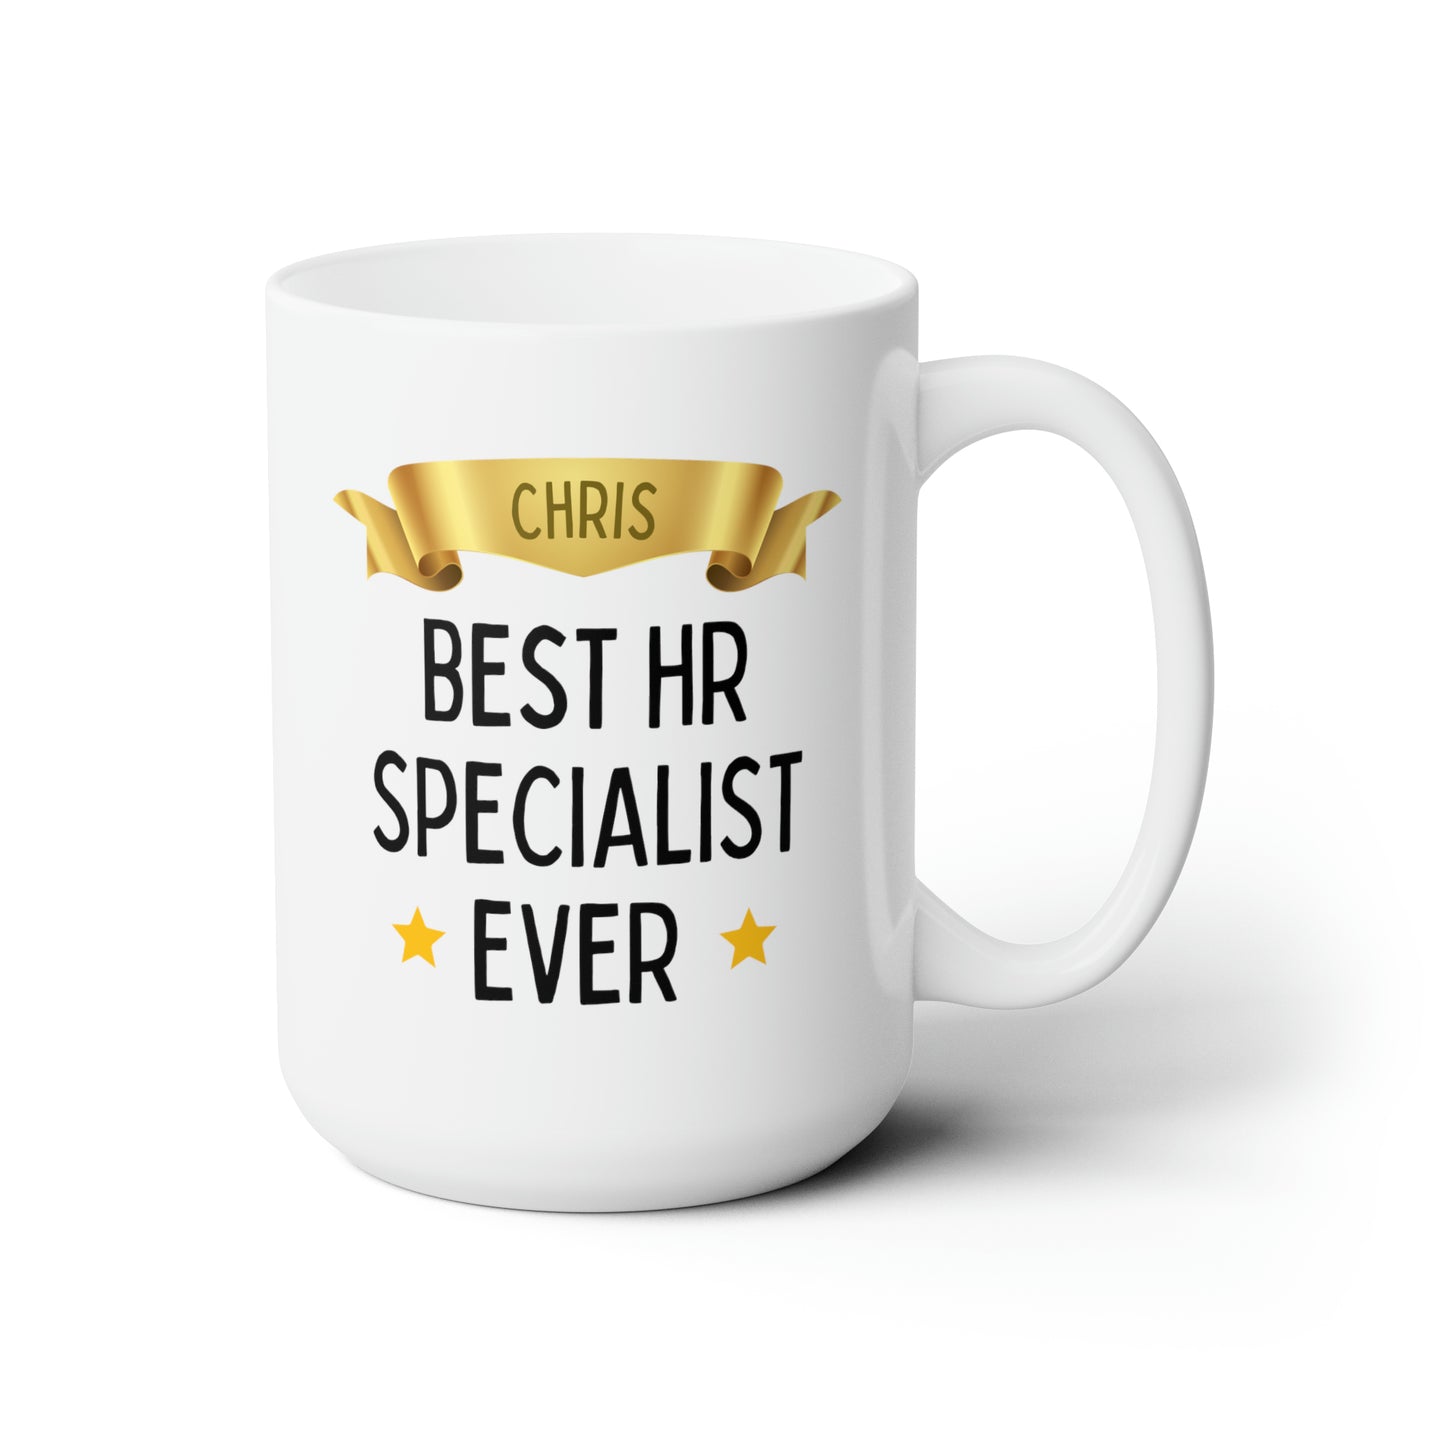 Best HR Specialist Ever 15oz white funny large coffee mug gift for human resources manager officer custom name personalize waveywares wavey wares wavywares wavy wares